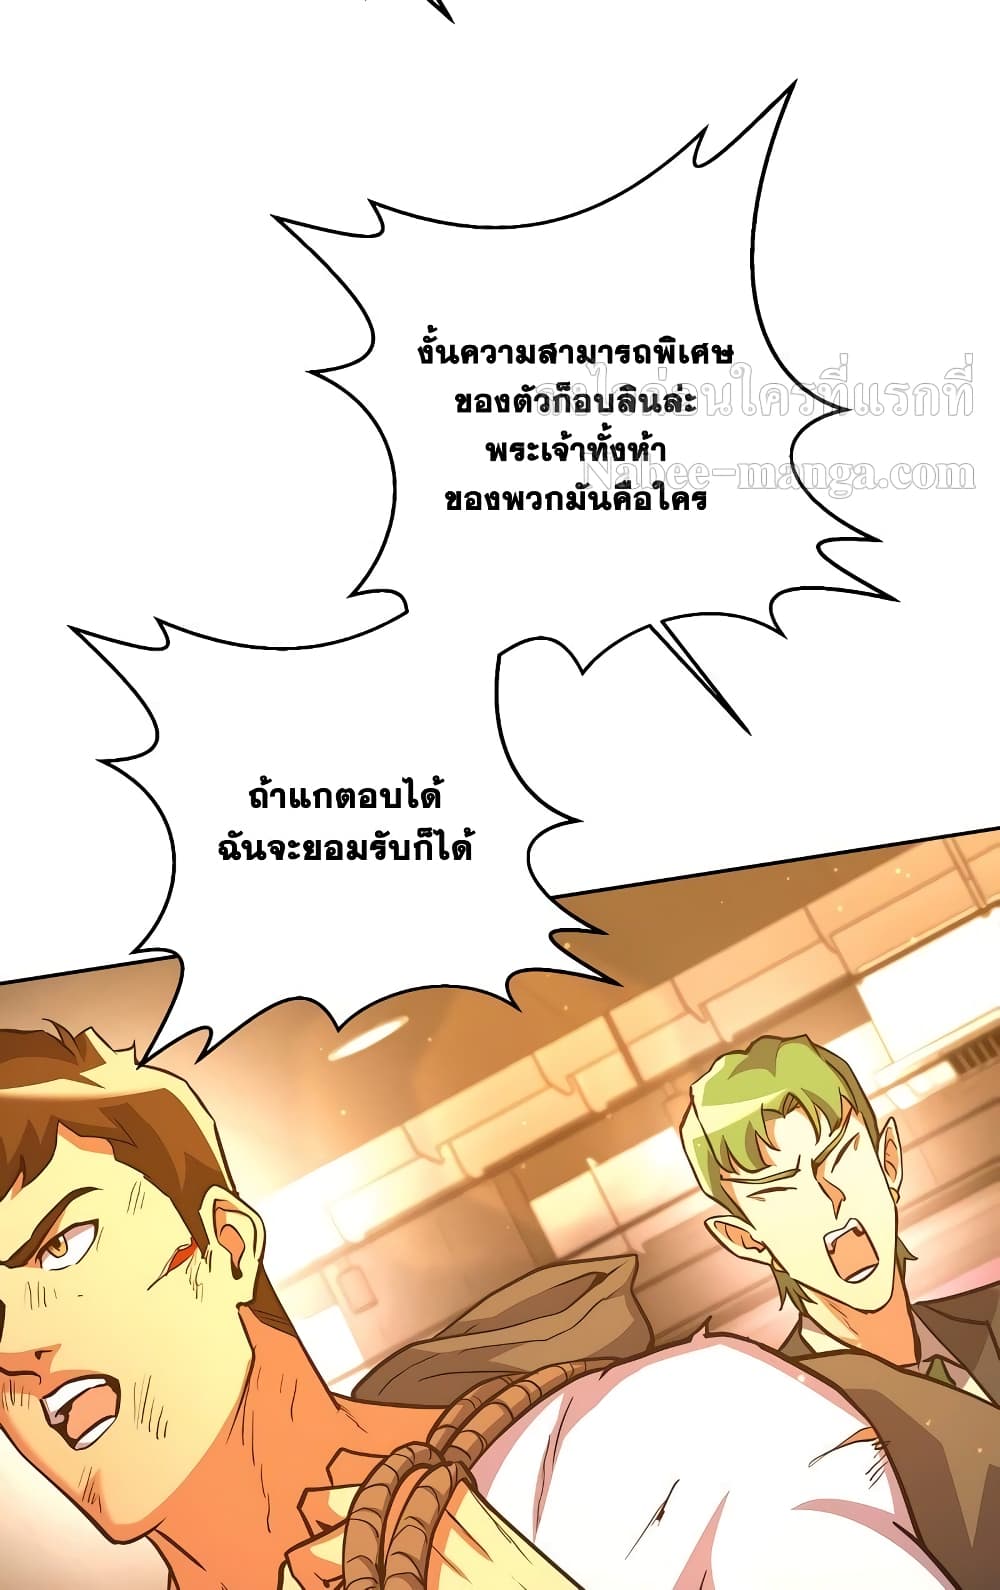 Surviving in an Action Manhwa 6-6